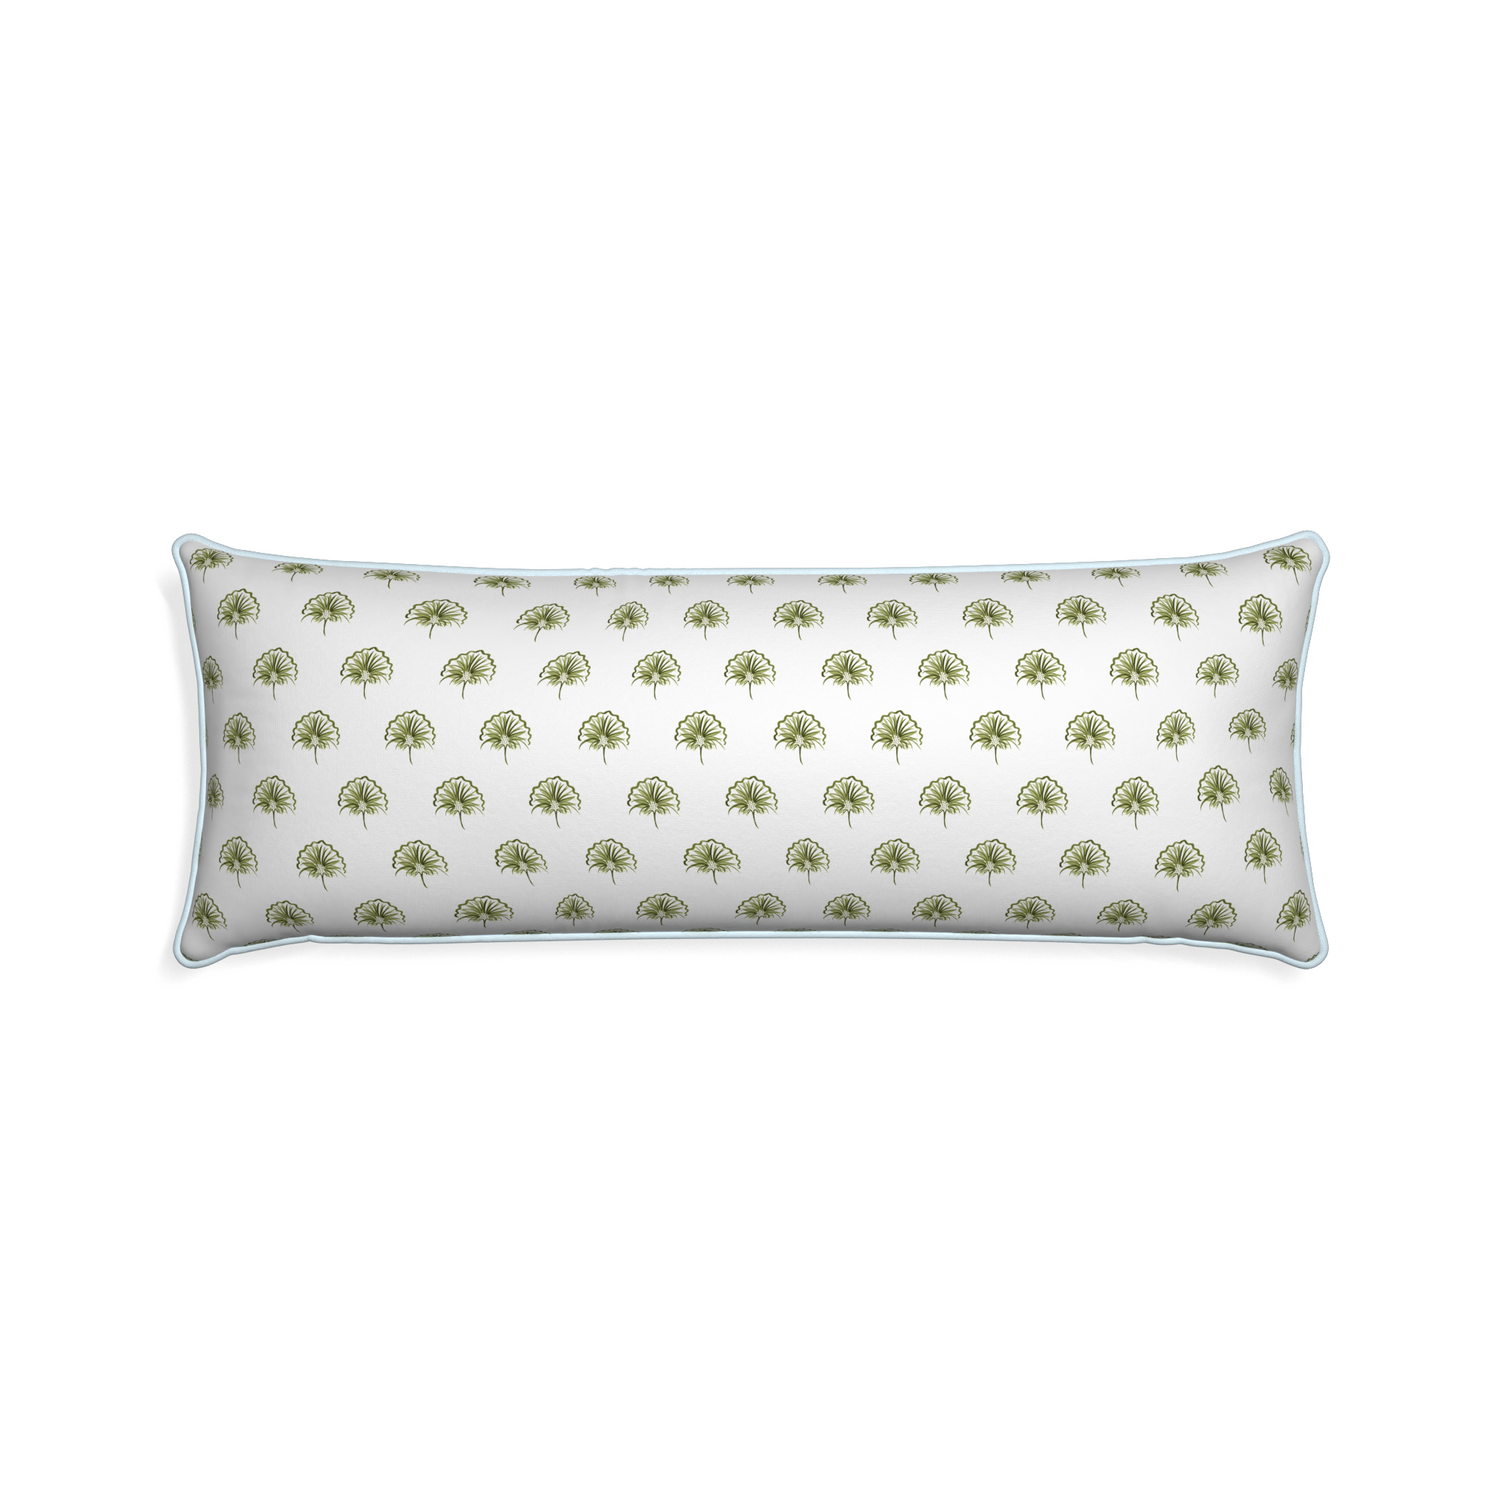 Xl-lumbar penelope moss custom green floralpillow with powder piping on white background